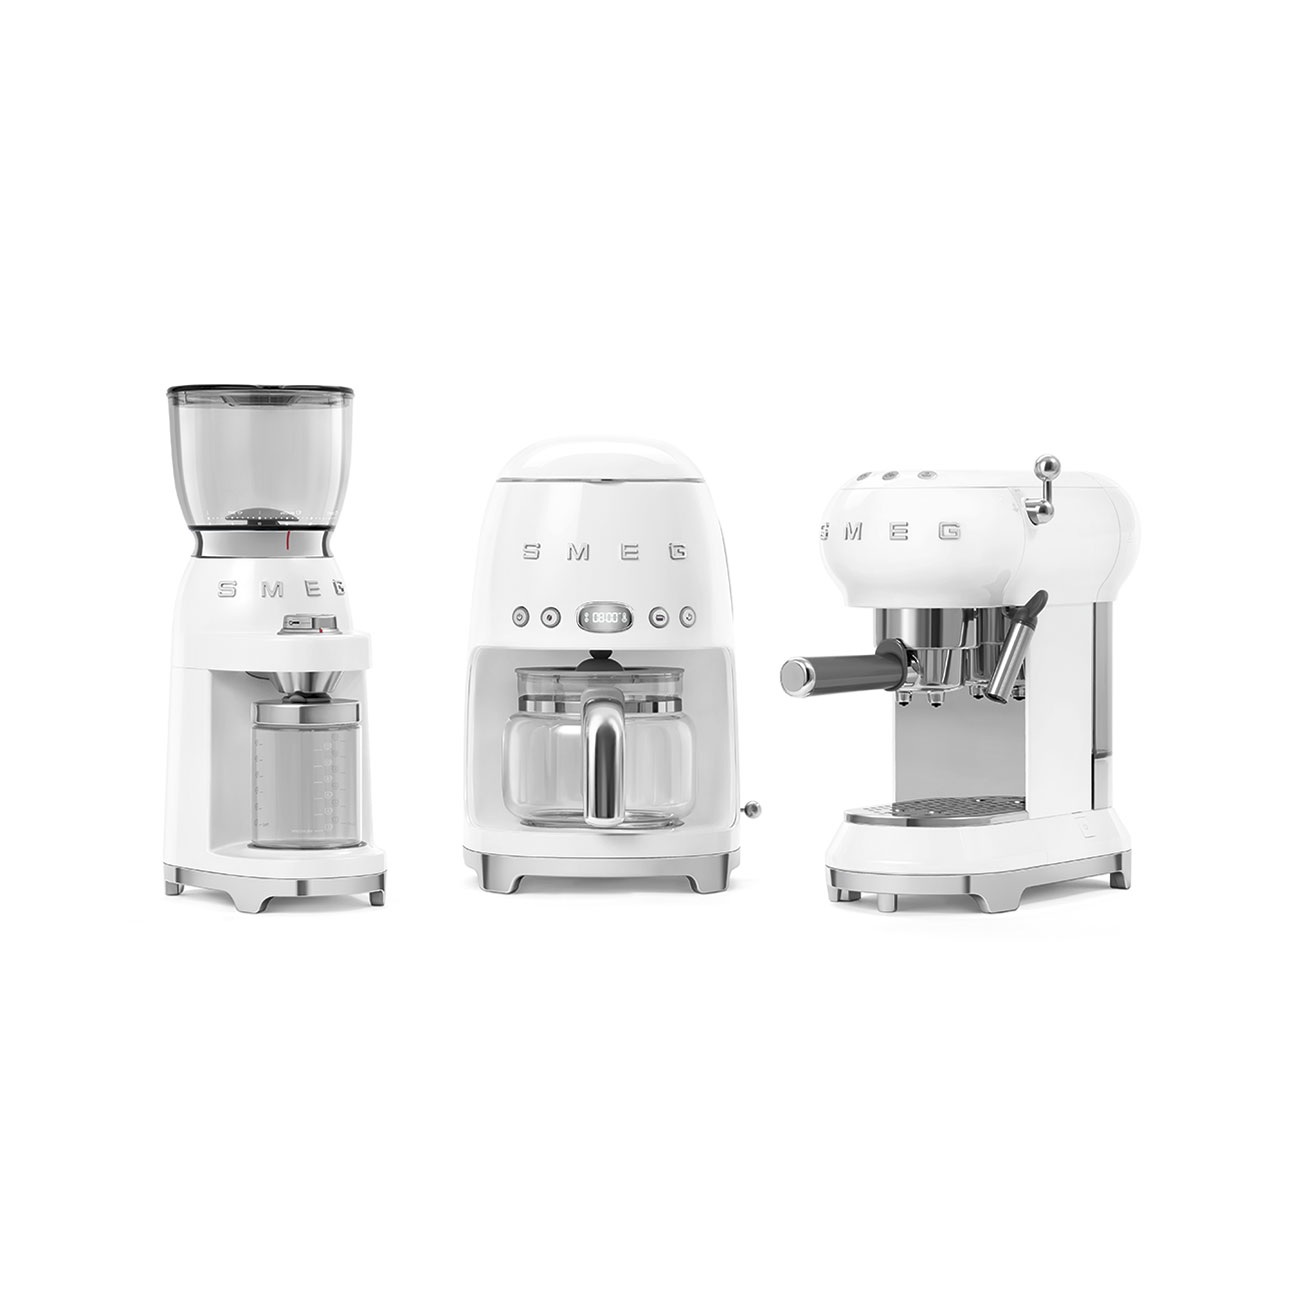 White Coffee Grinder featuring a conical burr - CGF11WHUK - Smeg_6